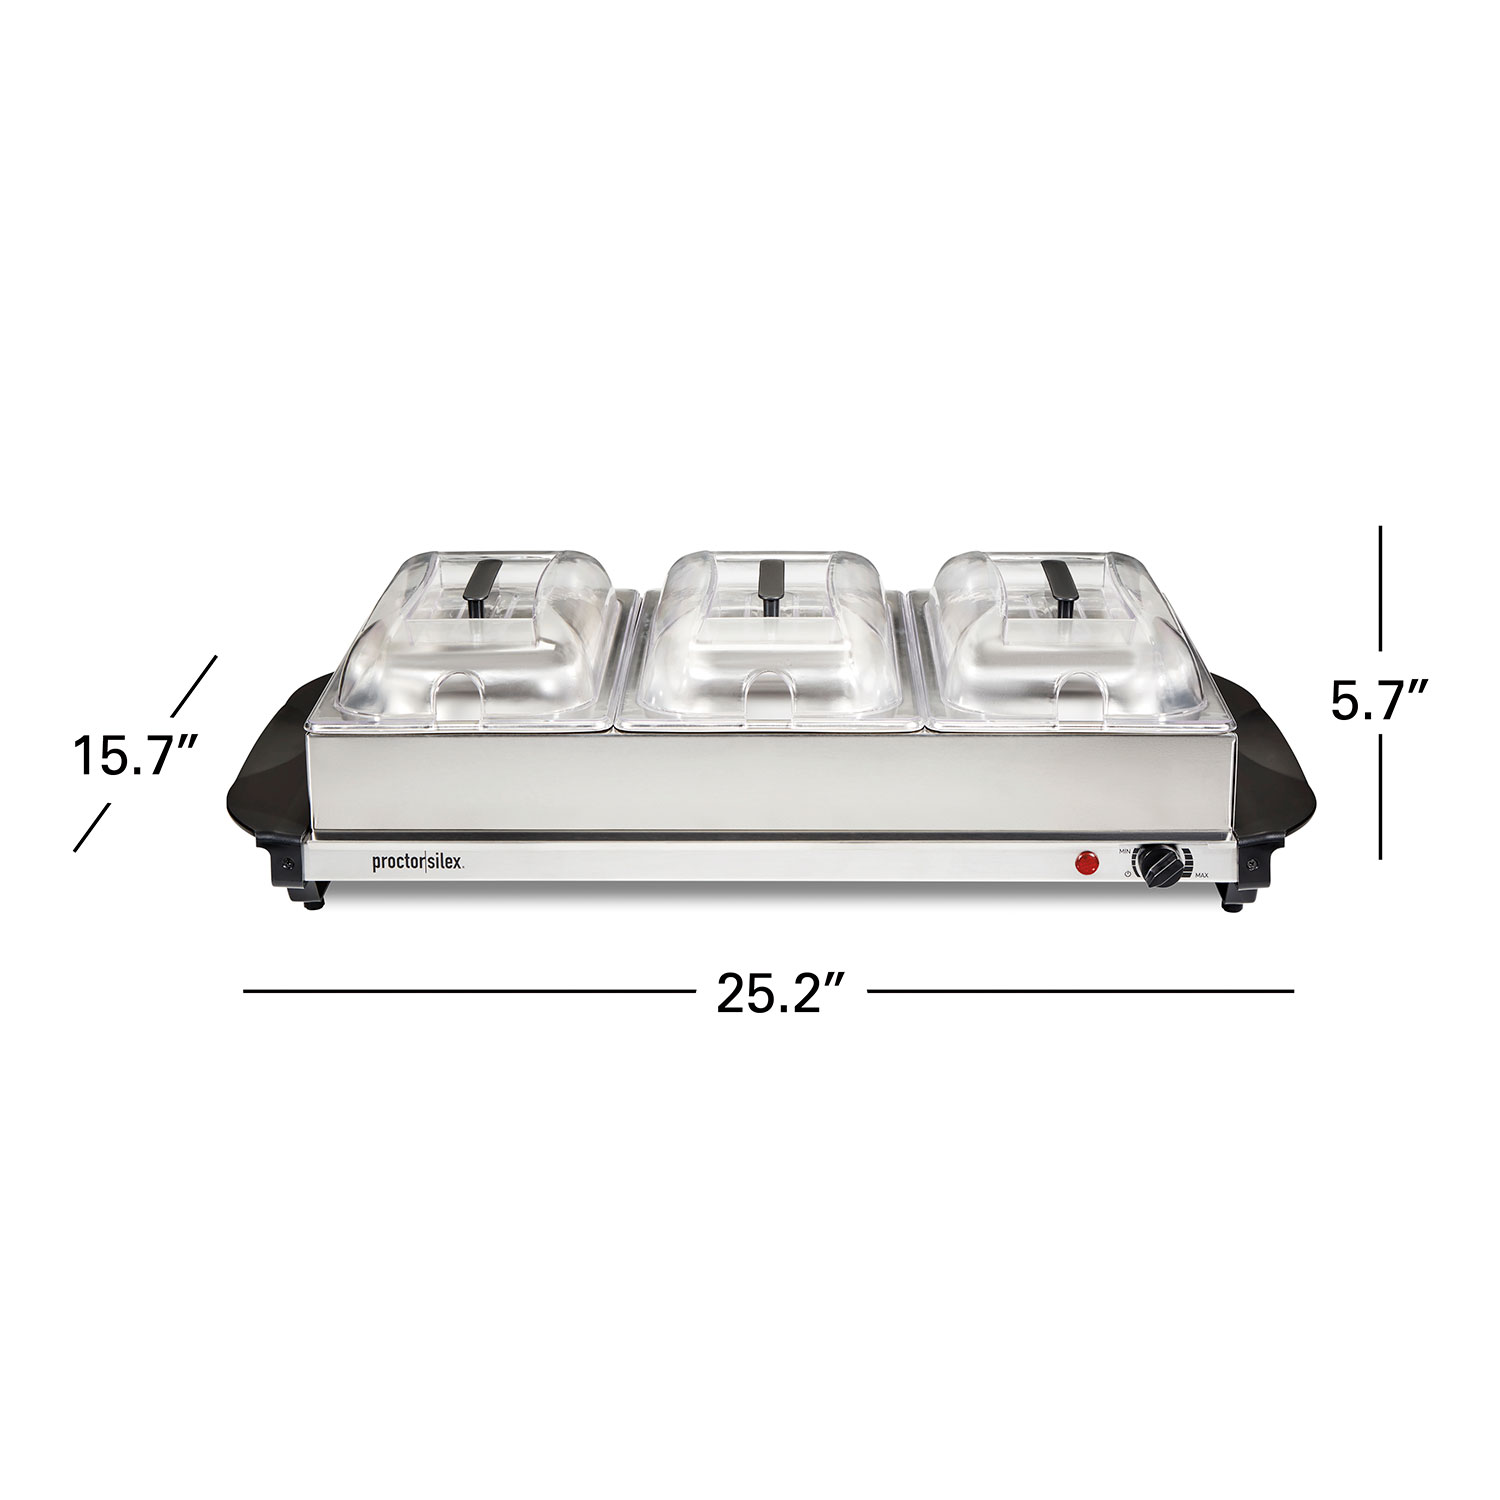 Buying food warmers? Check out our plate warmers